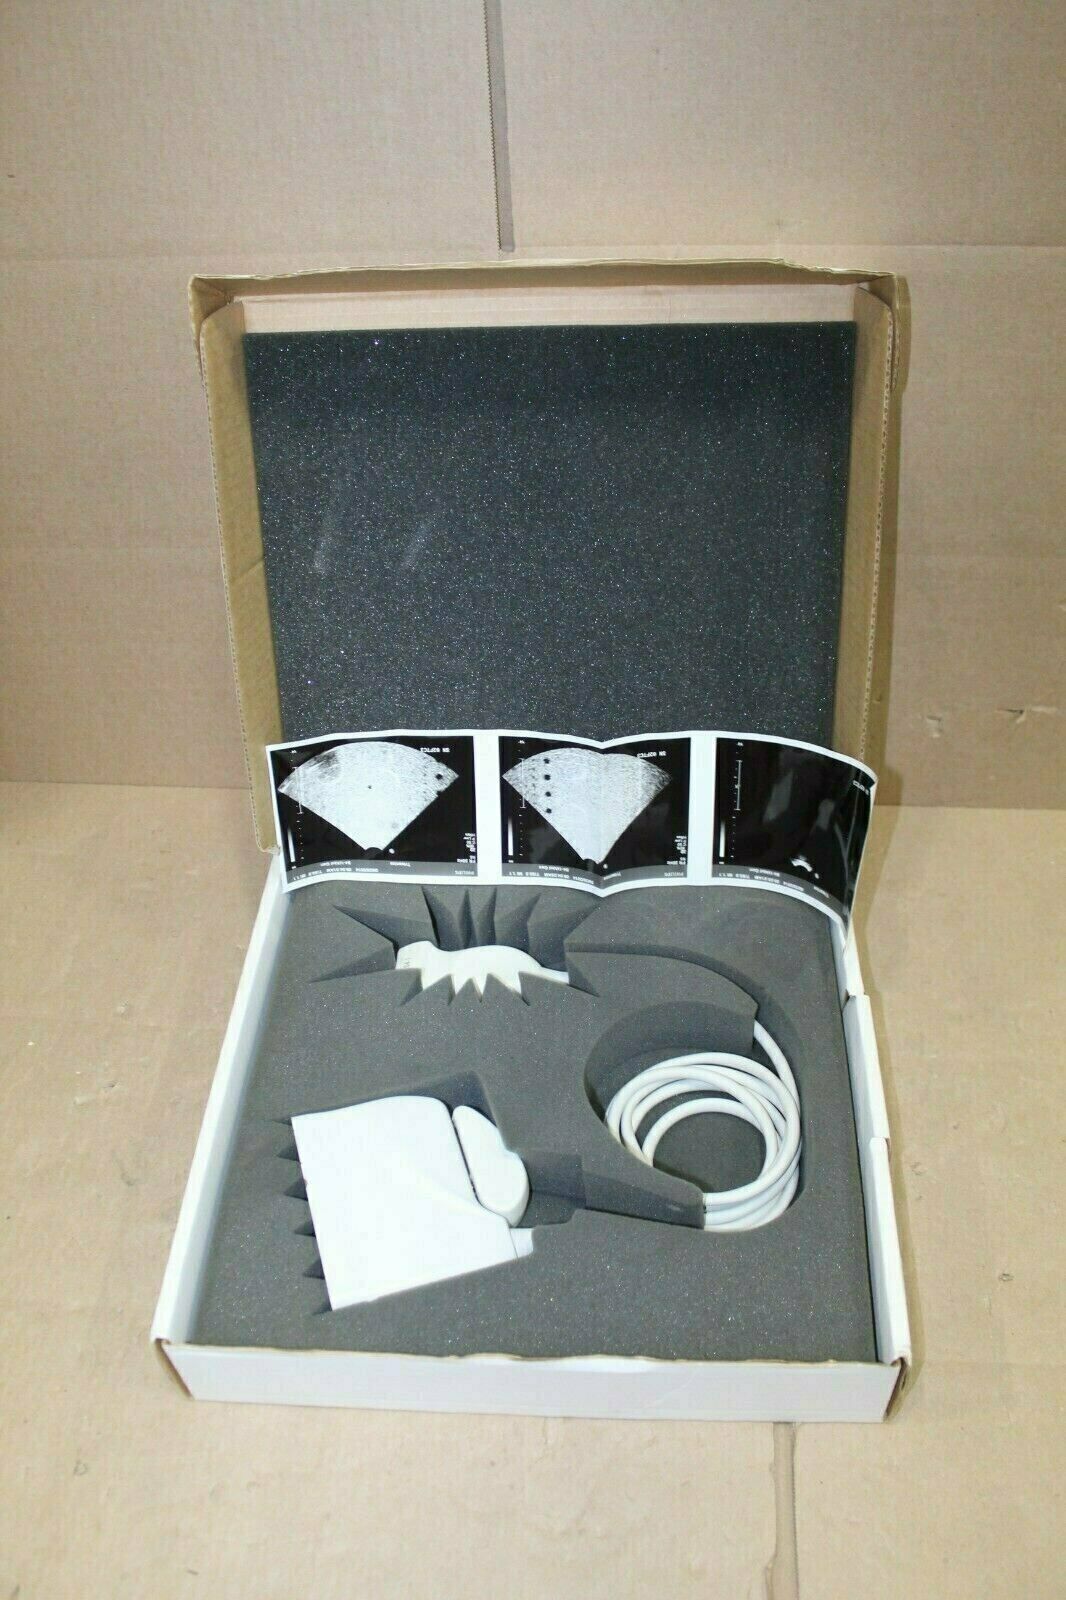 Philips S4-1 Ultrasound Transducer Probe DIAGNOSTIC ULTRASOUND MACHINES FOR SALE